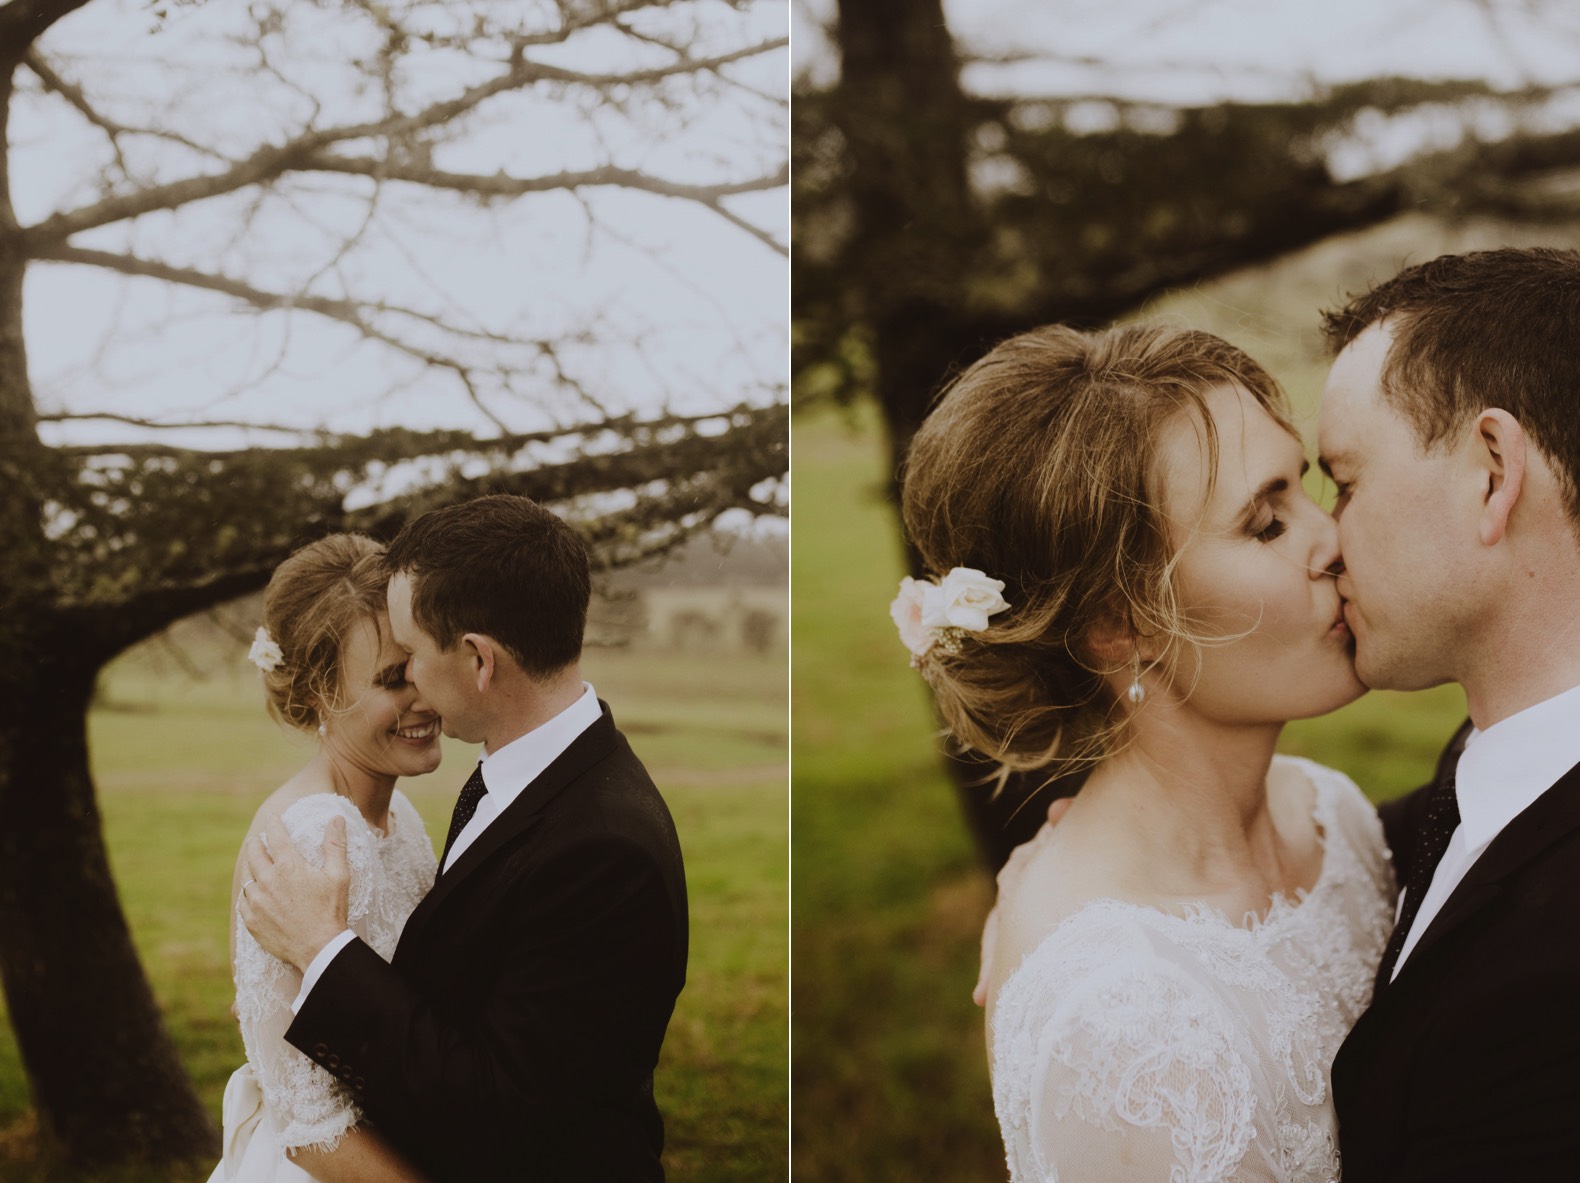 two romantic portraits of bride and groom under a tree in a field